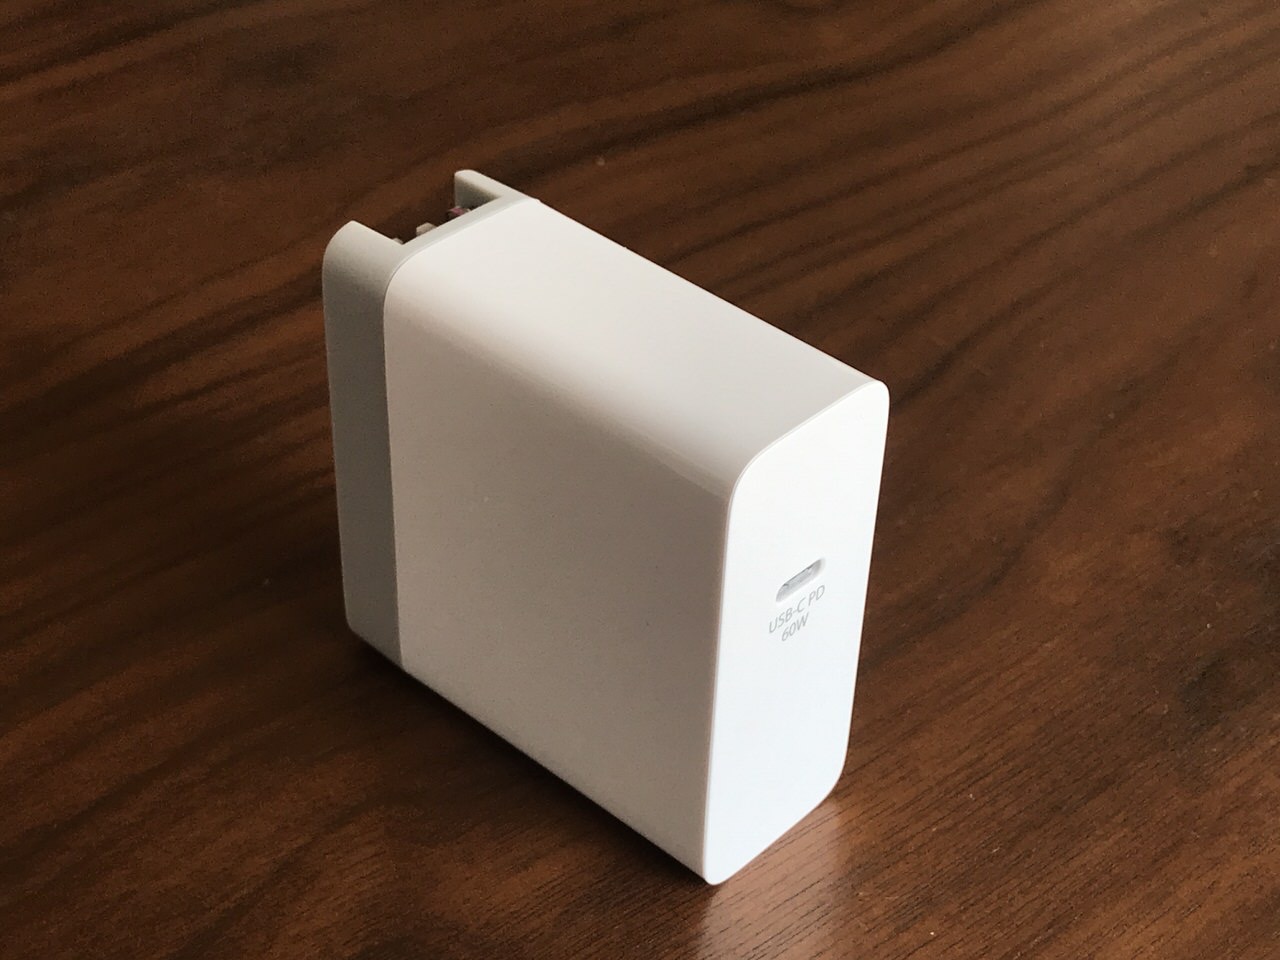 Power Delivery（PD）最大60W対応のACアダプタ「cheero USB-C PD Charger 60W」